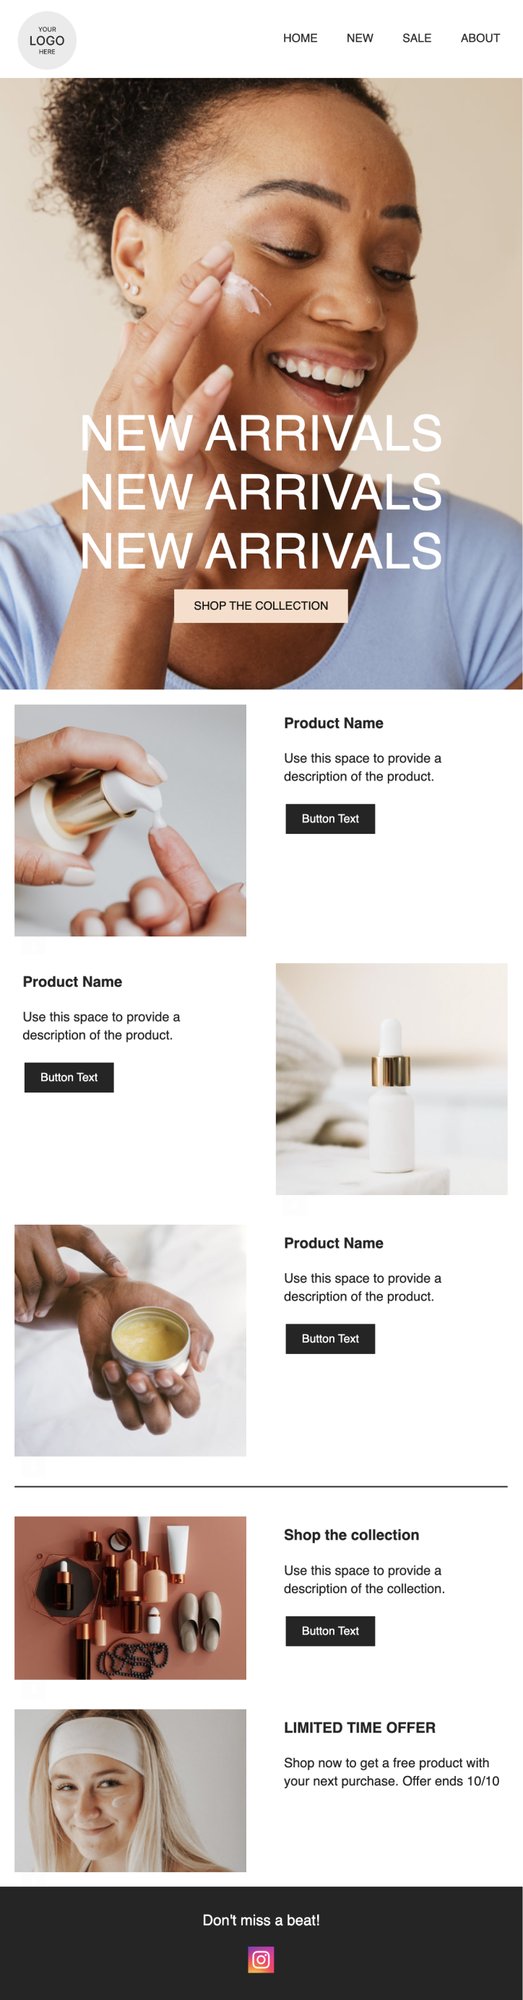 new arrivals email template